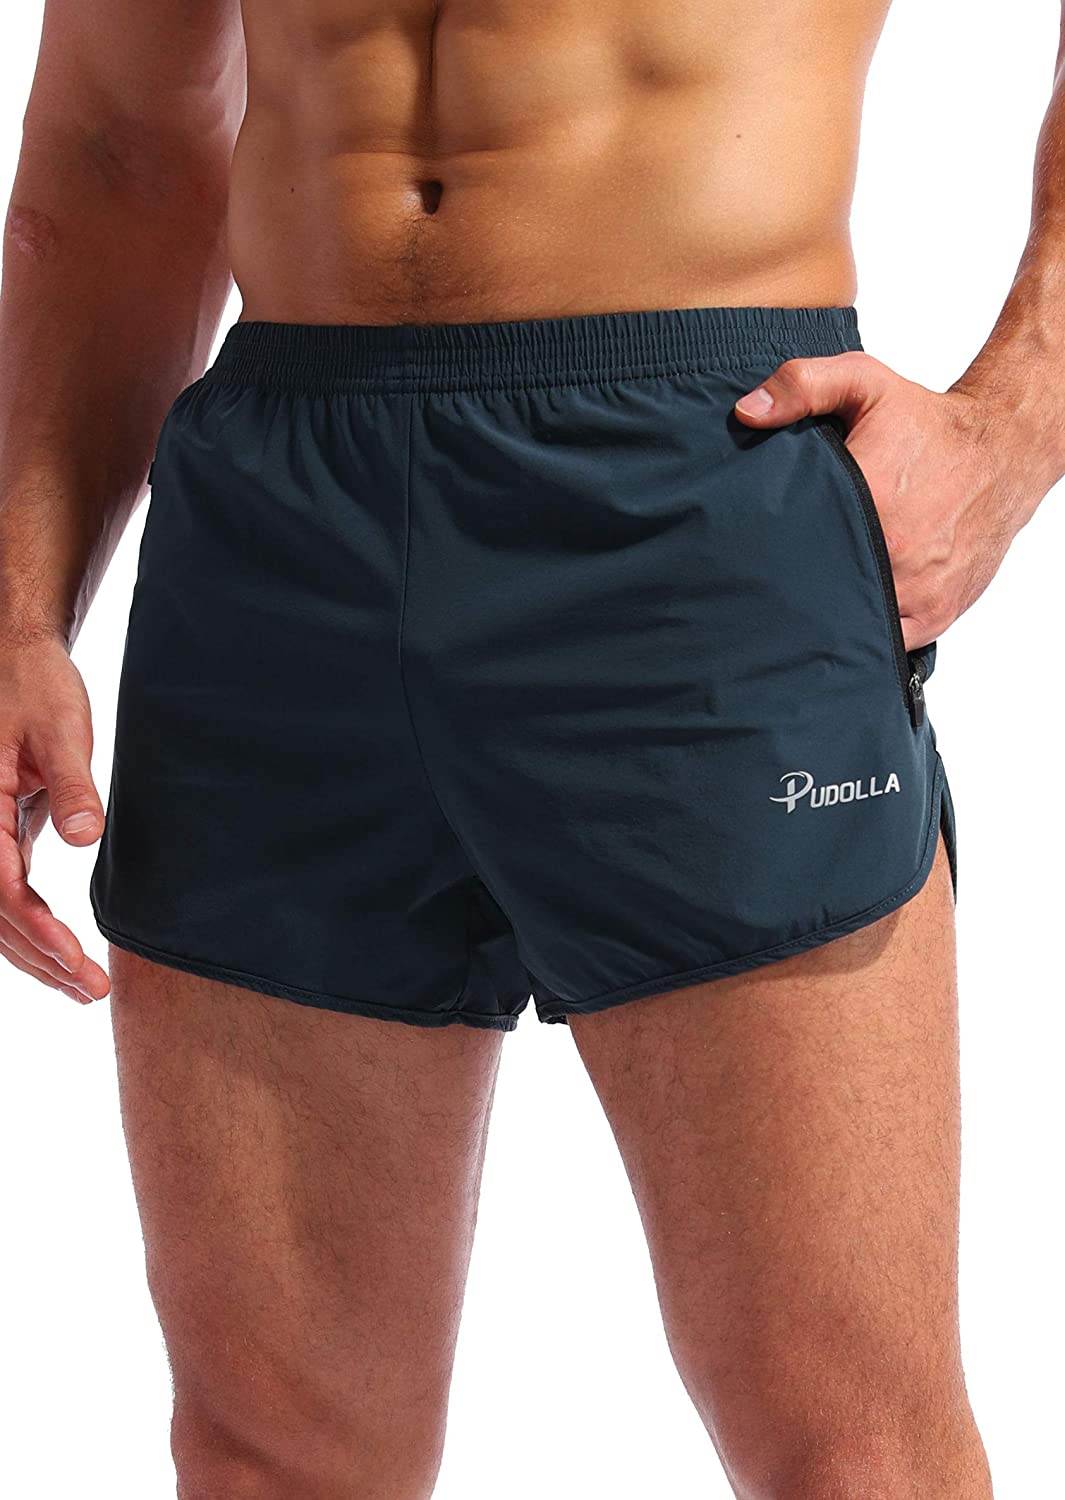 Pudolla Men S Running Shorts 3 Inch Quick Dry Gym Athletic Workout Shorts For Men With Zipper